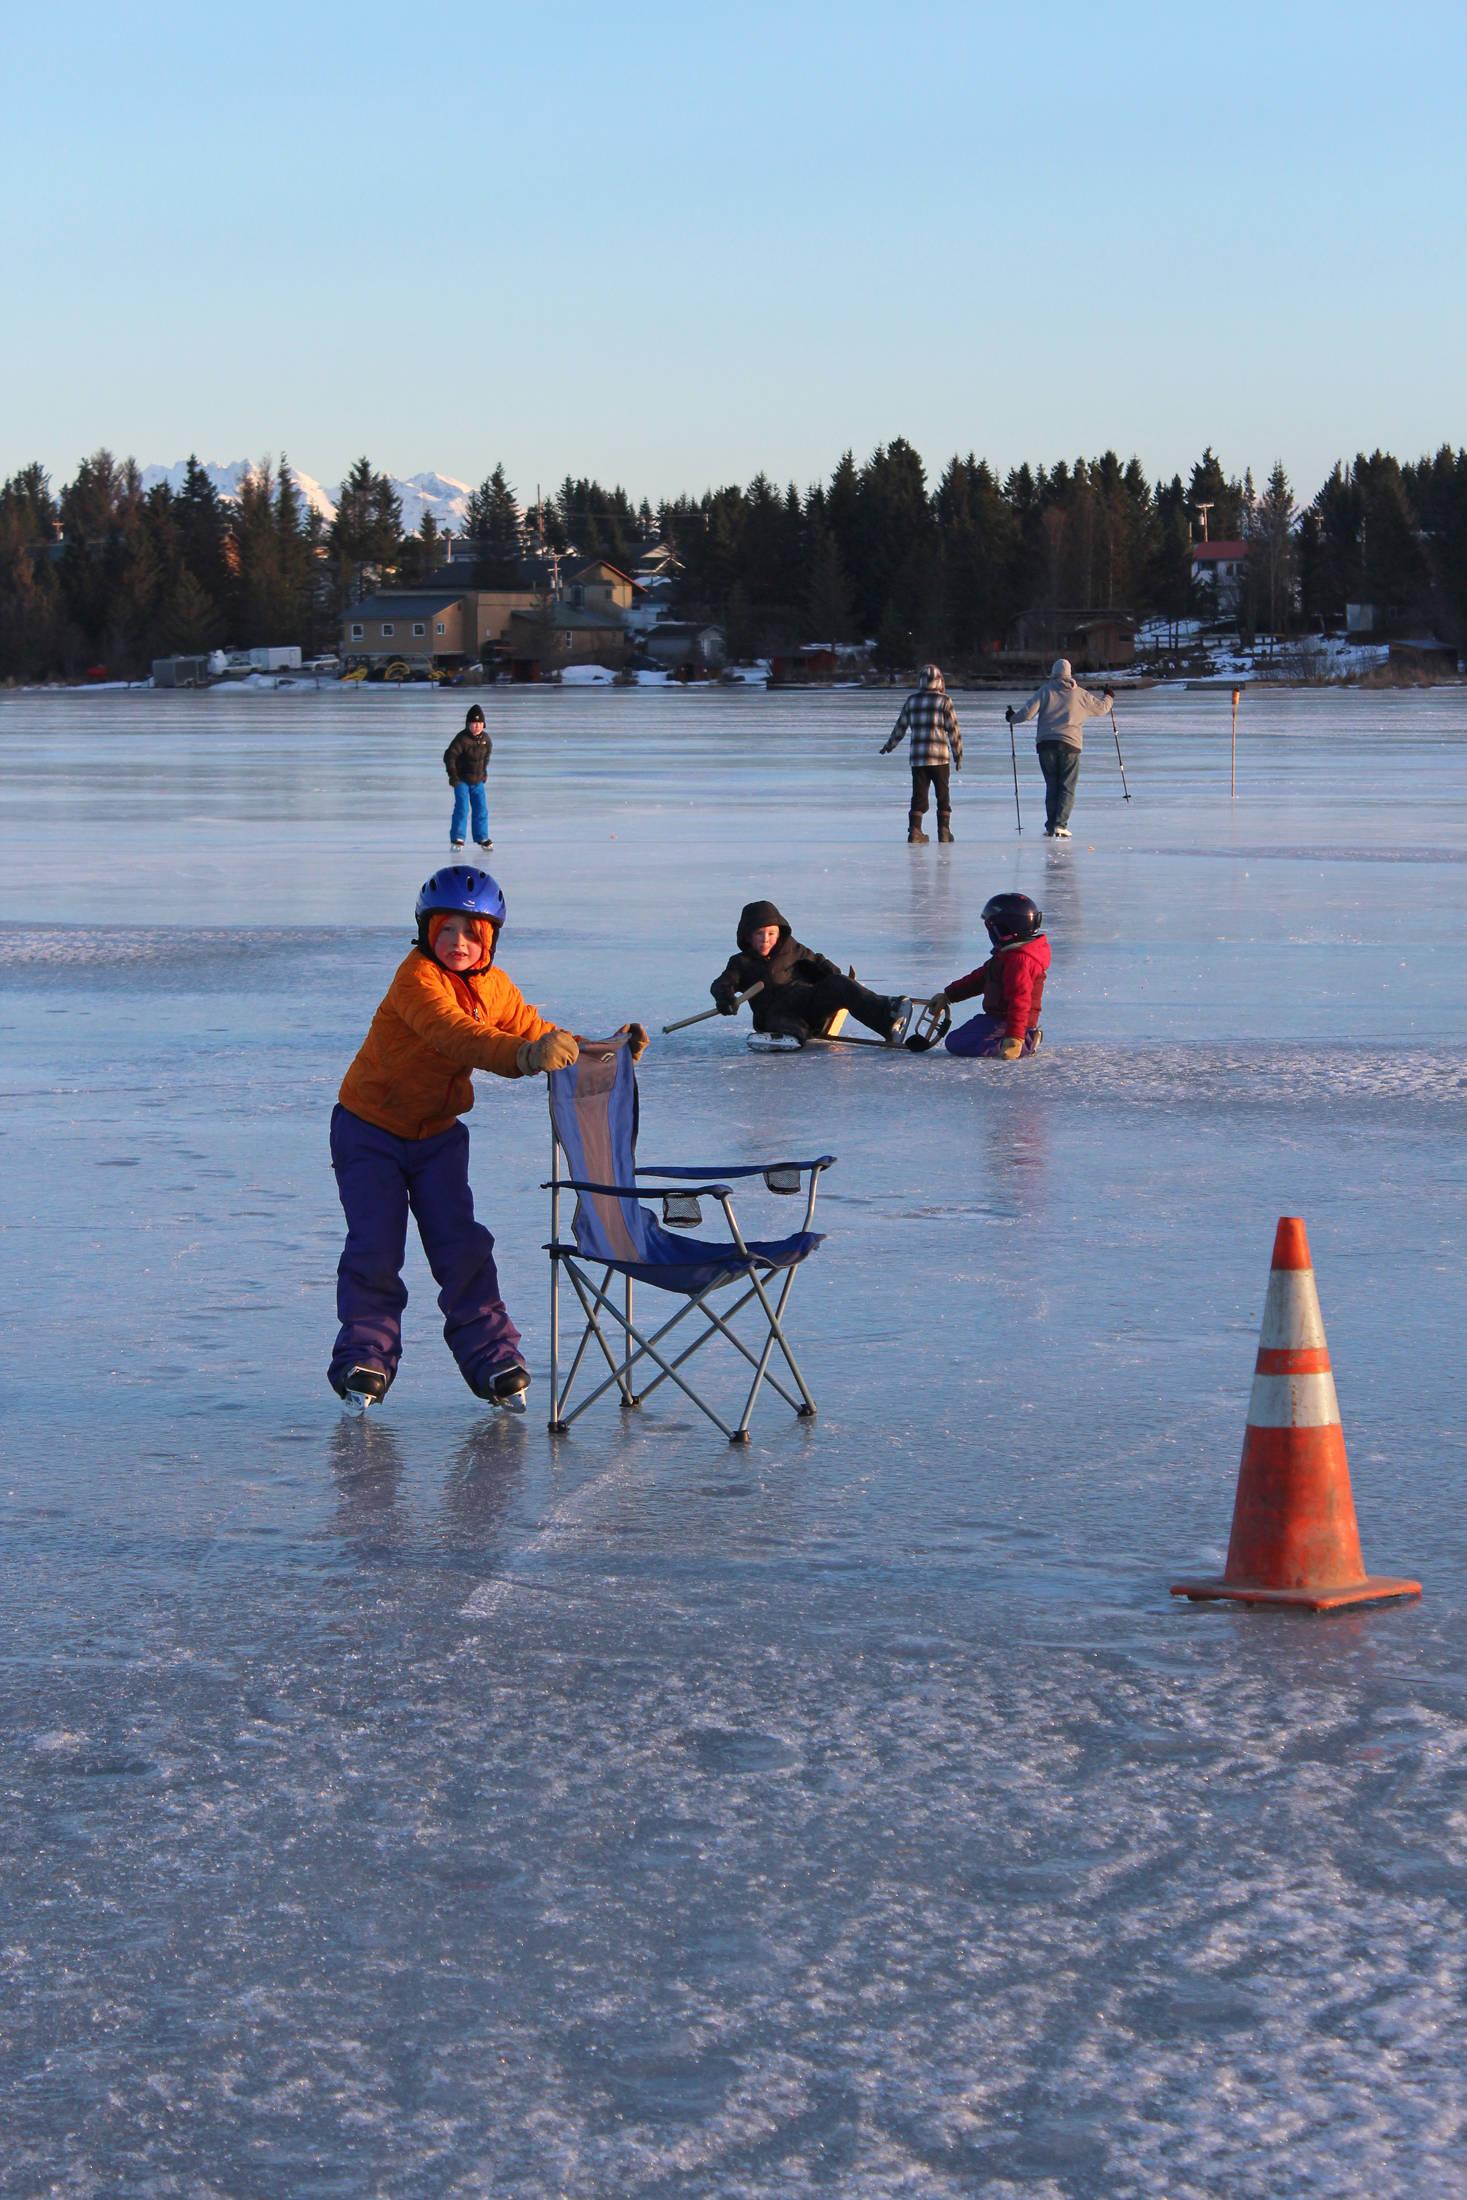 Community members enjoy a free ice skating party hosted by Rotary Club of Homer-Kachemak Bay, McDonalds and the City of Homer on Friday, Feb. 15, 2019 at Ben Walters Park and Beluga Lake in Homer, Alaska. (Photo by Megan Pacer/Homer News)